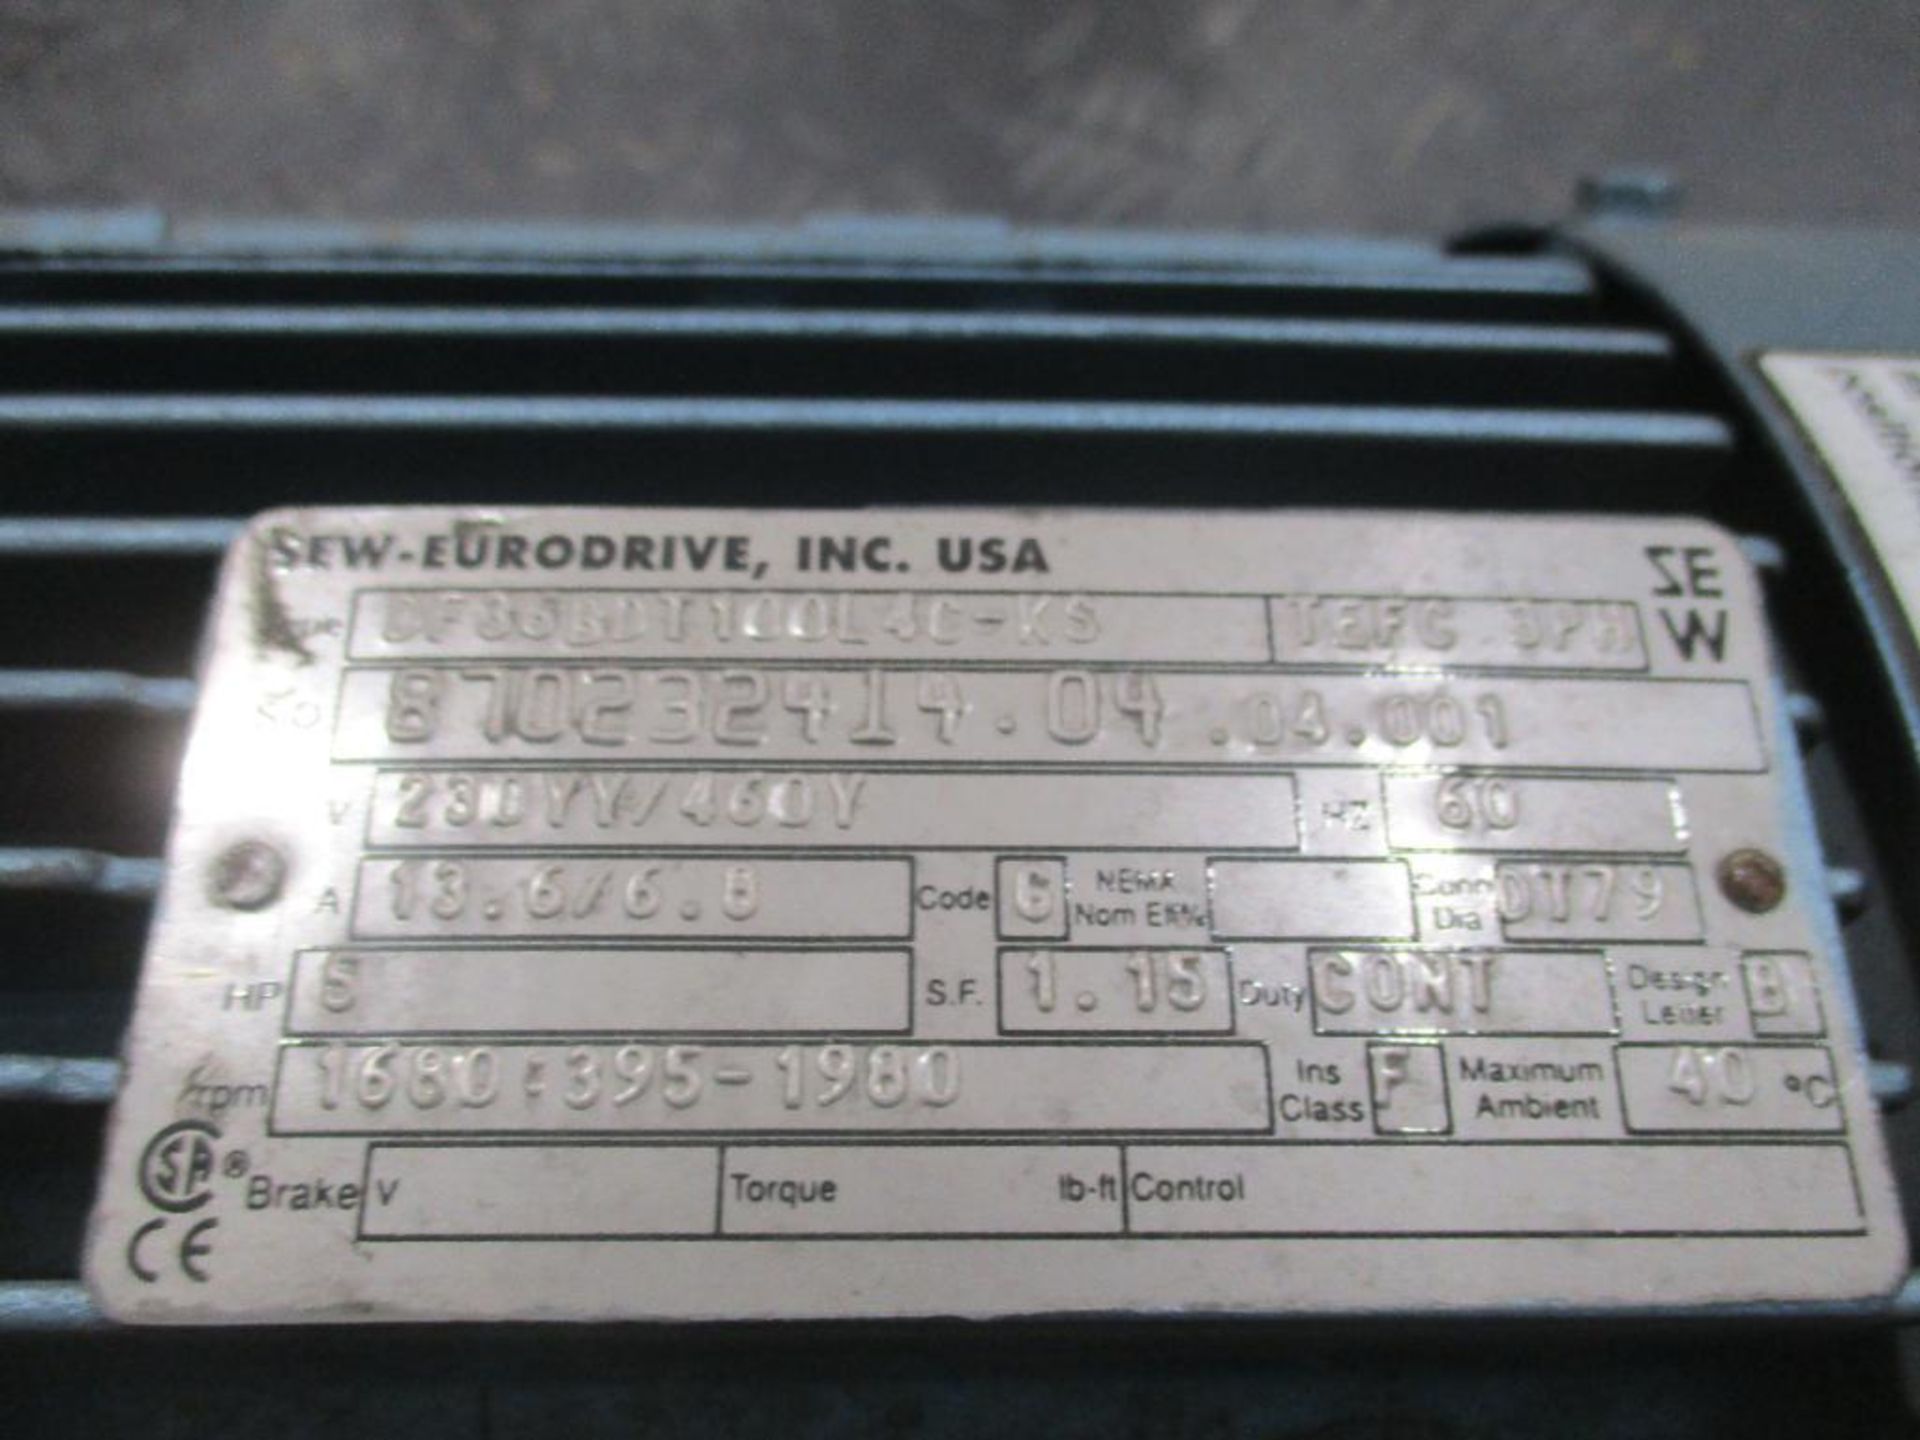 SEW-EURODRIVE 5HP 1680:395-1980RPM GEARMOTOR P/N DF35BDT100L4C-KS, 168# lbs (There will be a $40 Rig - Image 5 of 5